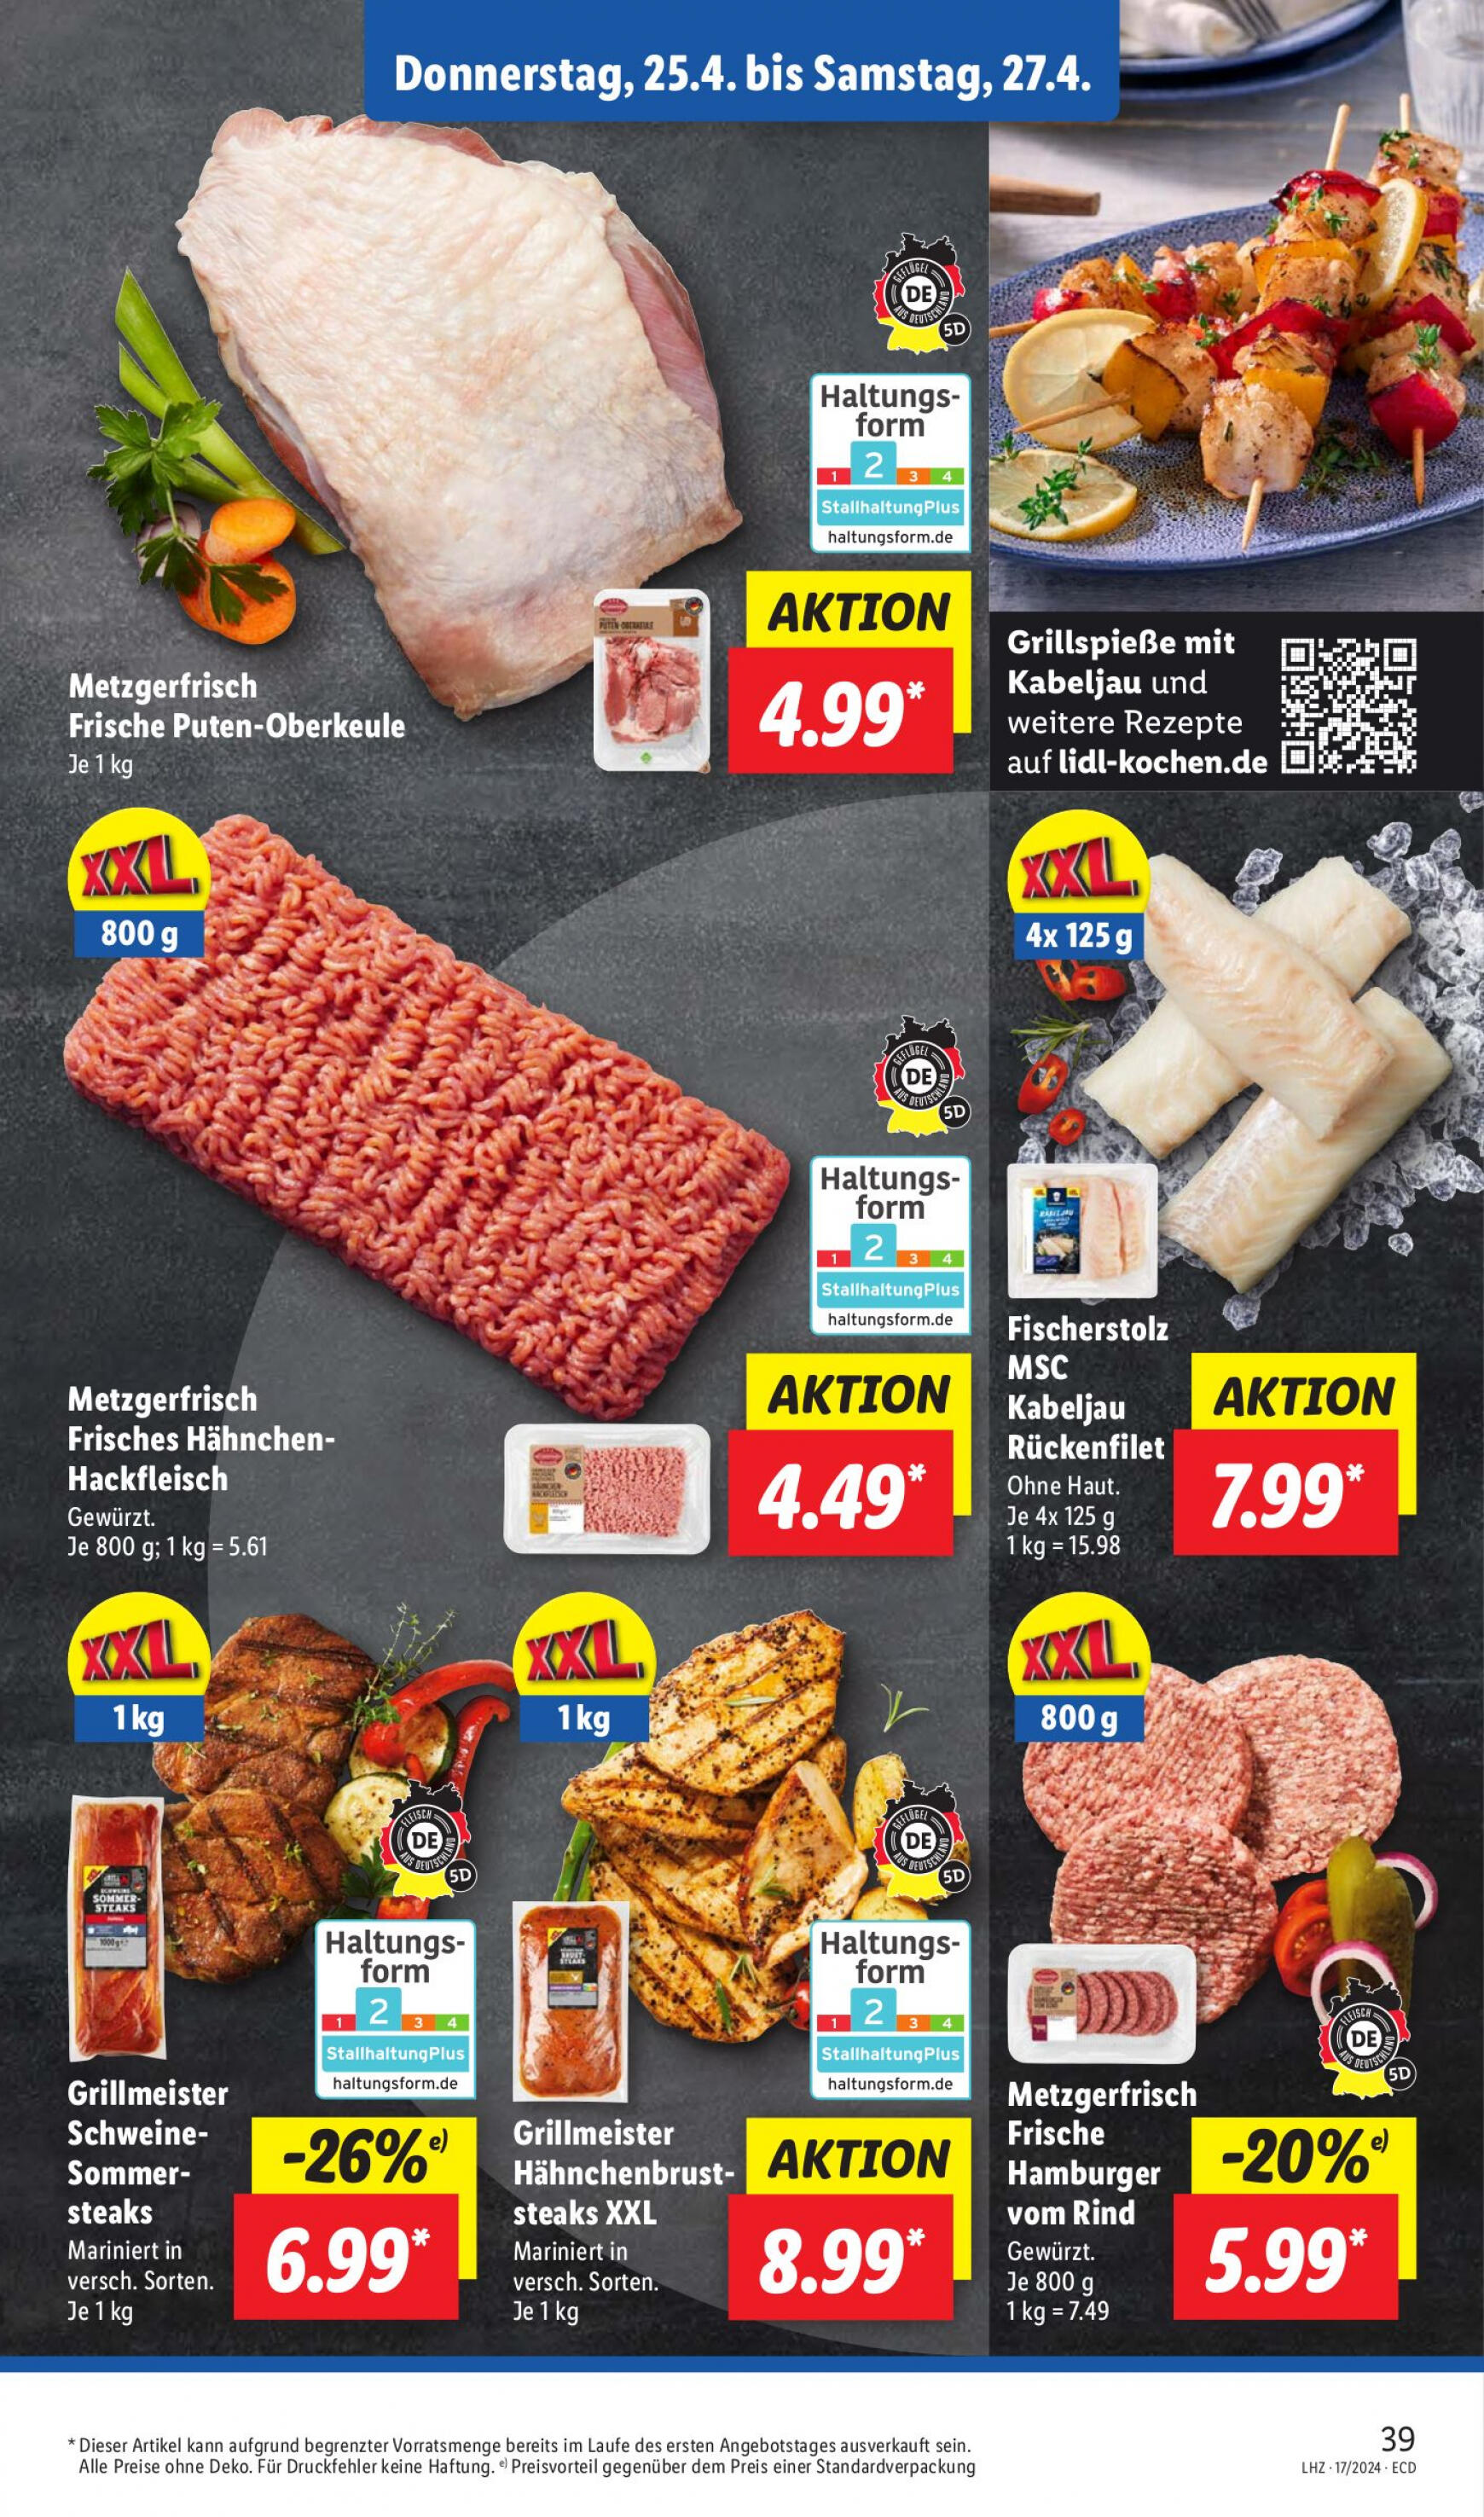 lidl - Flyer Lidl aktuell 22.04. - 27.04. - page: 49